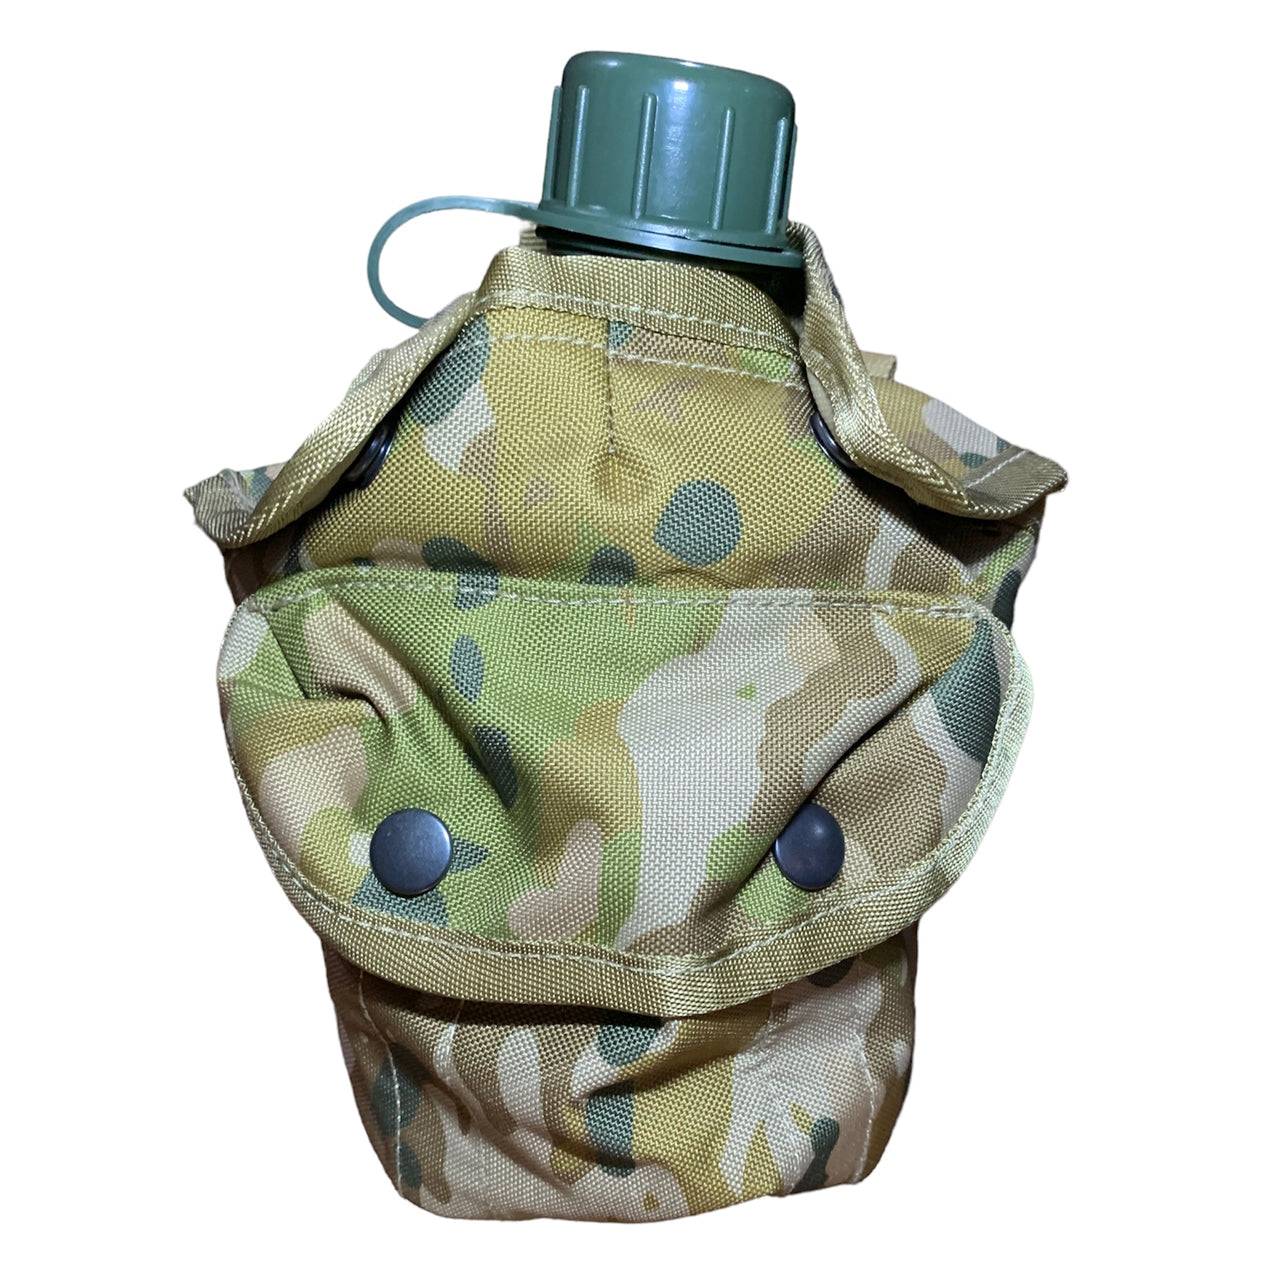 Can fit a kidney cup with a water bottle in the main pouch Can fit a hexamine stove in the front pocket Made from heavy duty 900D 2 coats PU fabric MOLLE fittings Heavy duty webbing Drainage holes on base www.defenceqstore.com.au